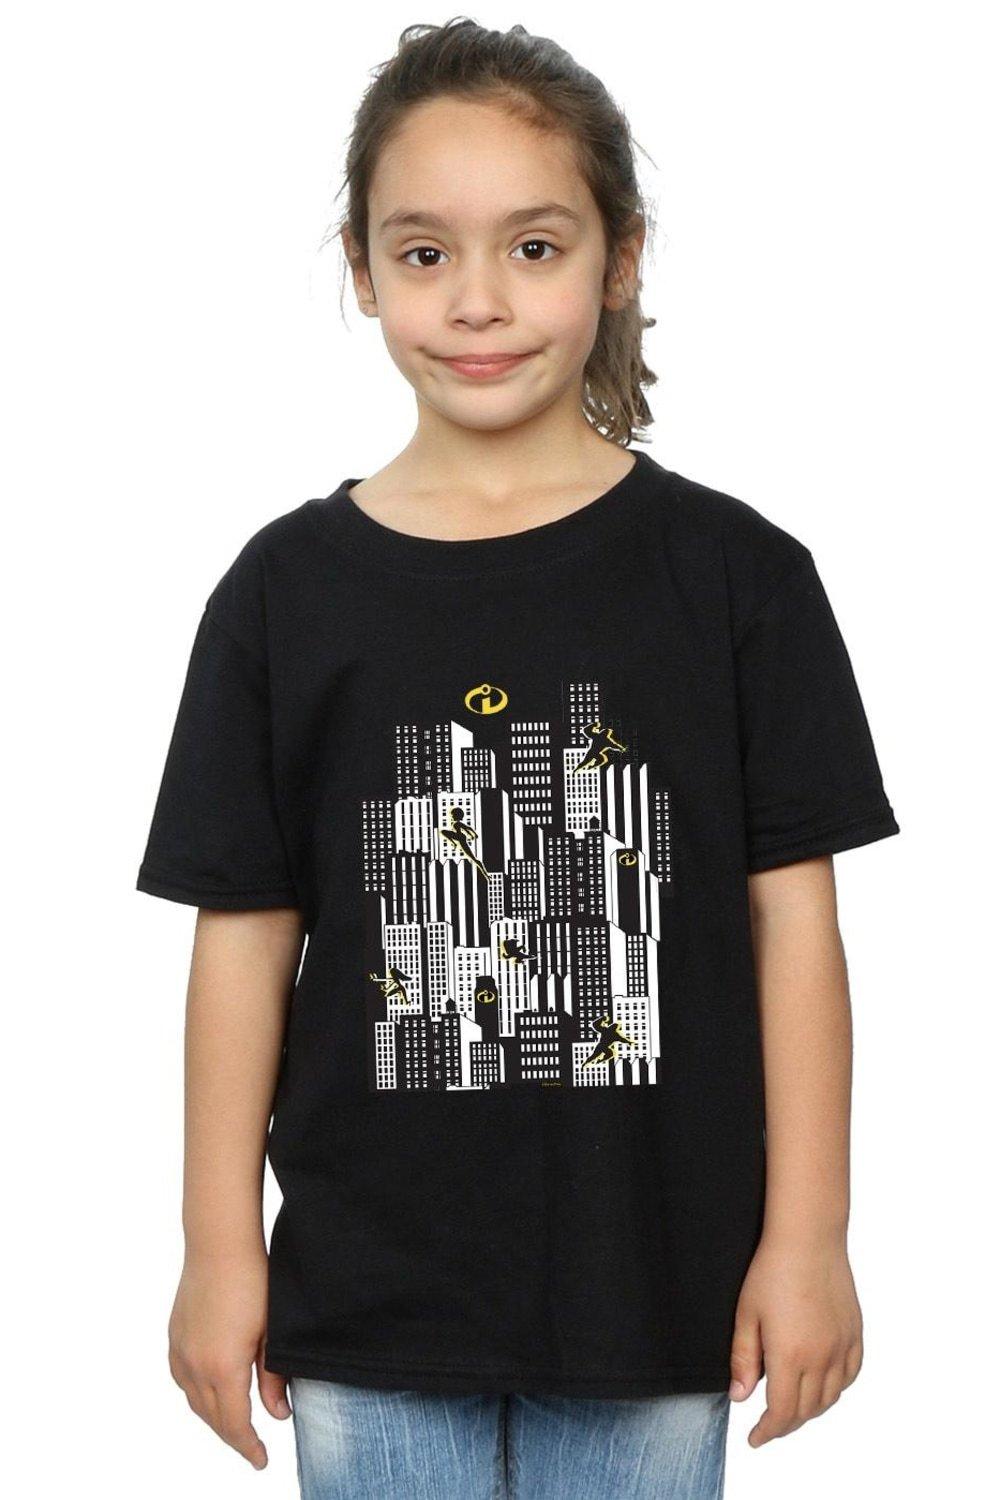 The Incredibles Skyline Cotton T-Shirt